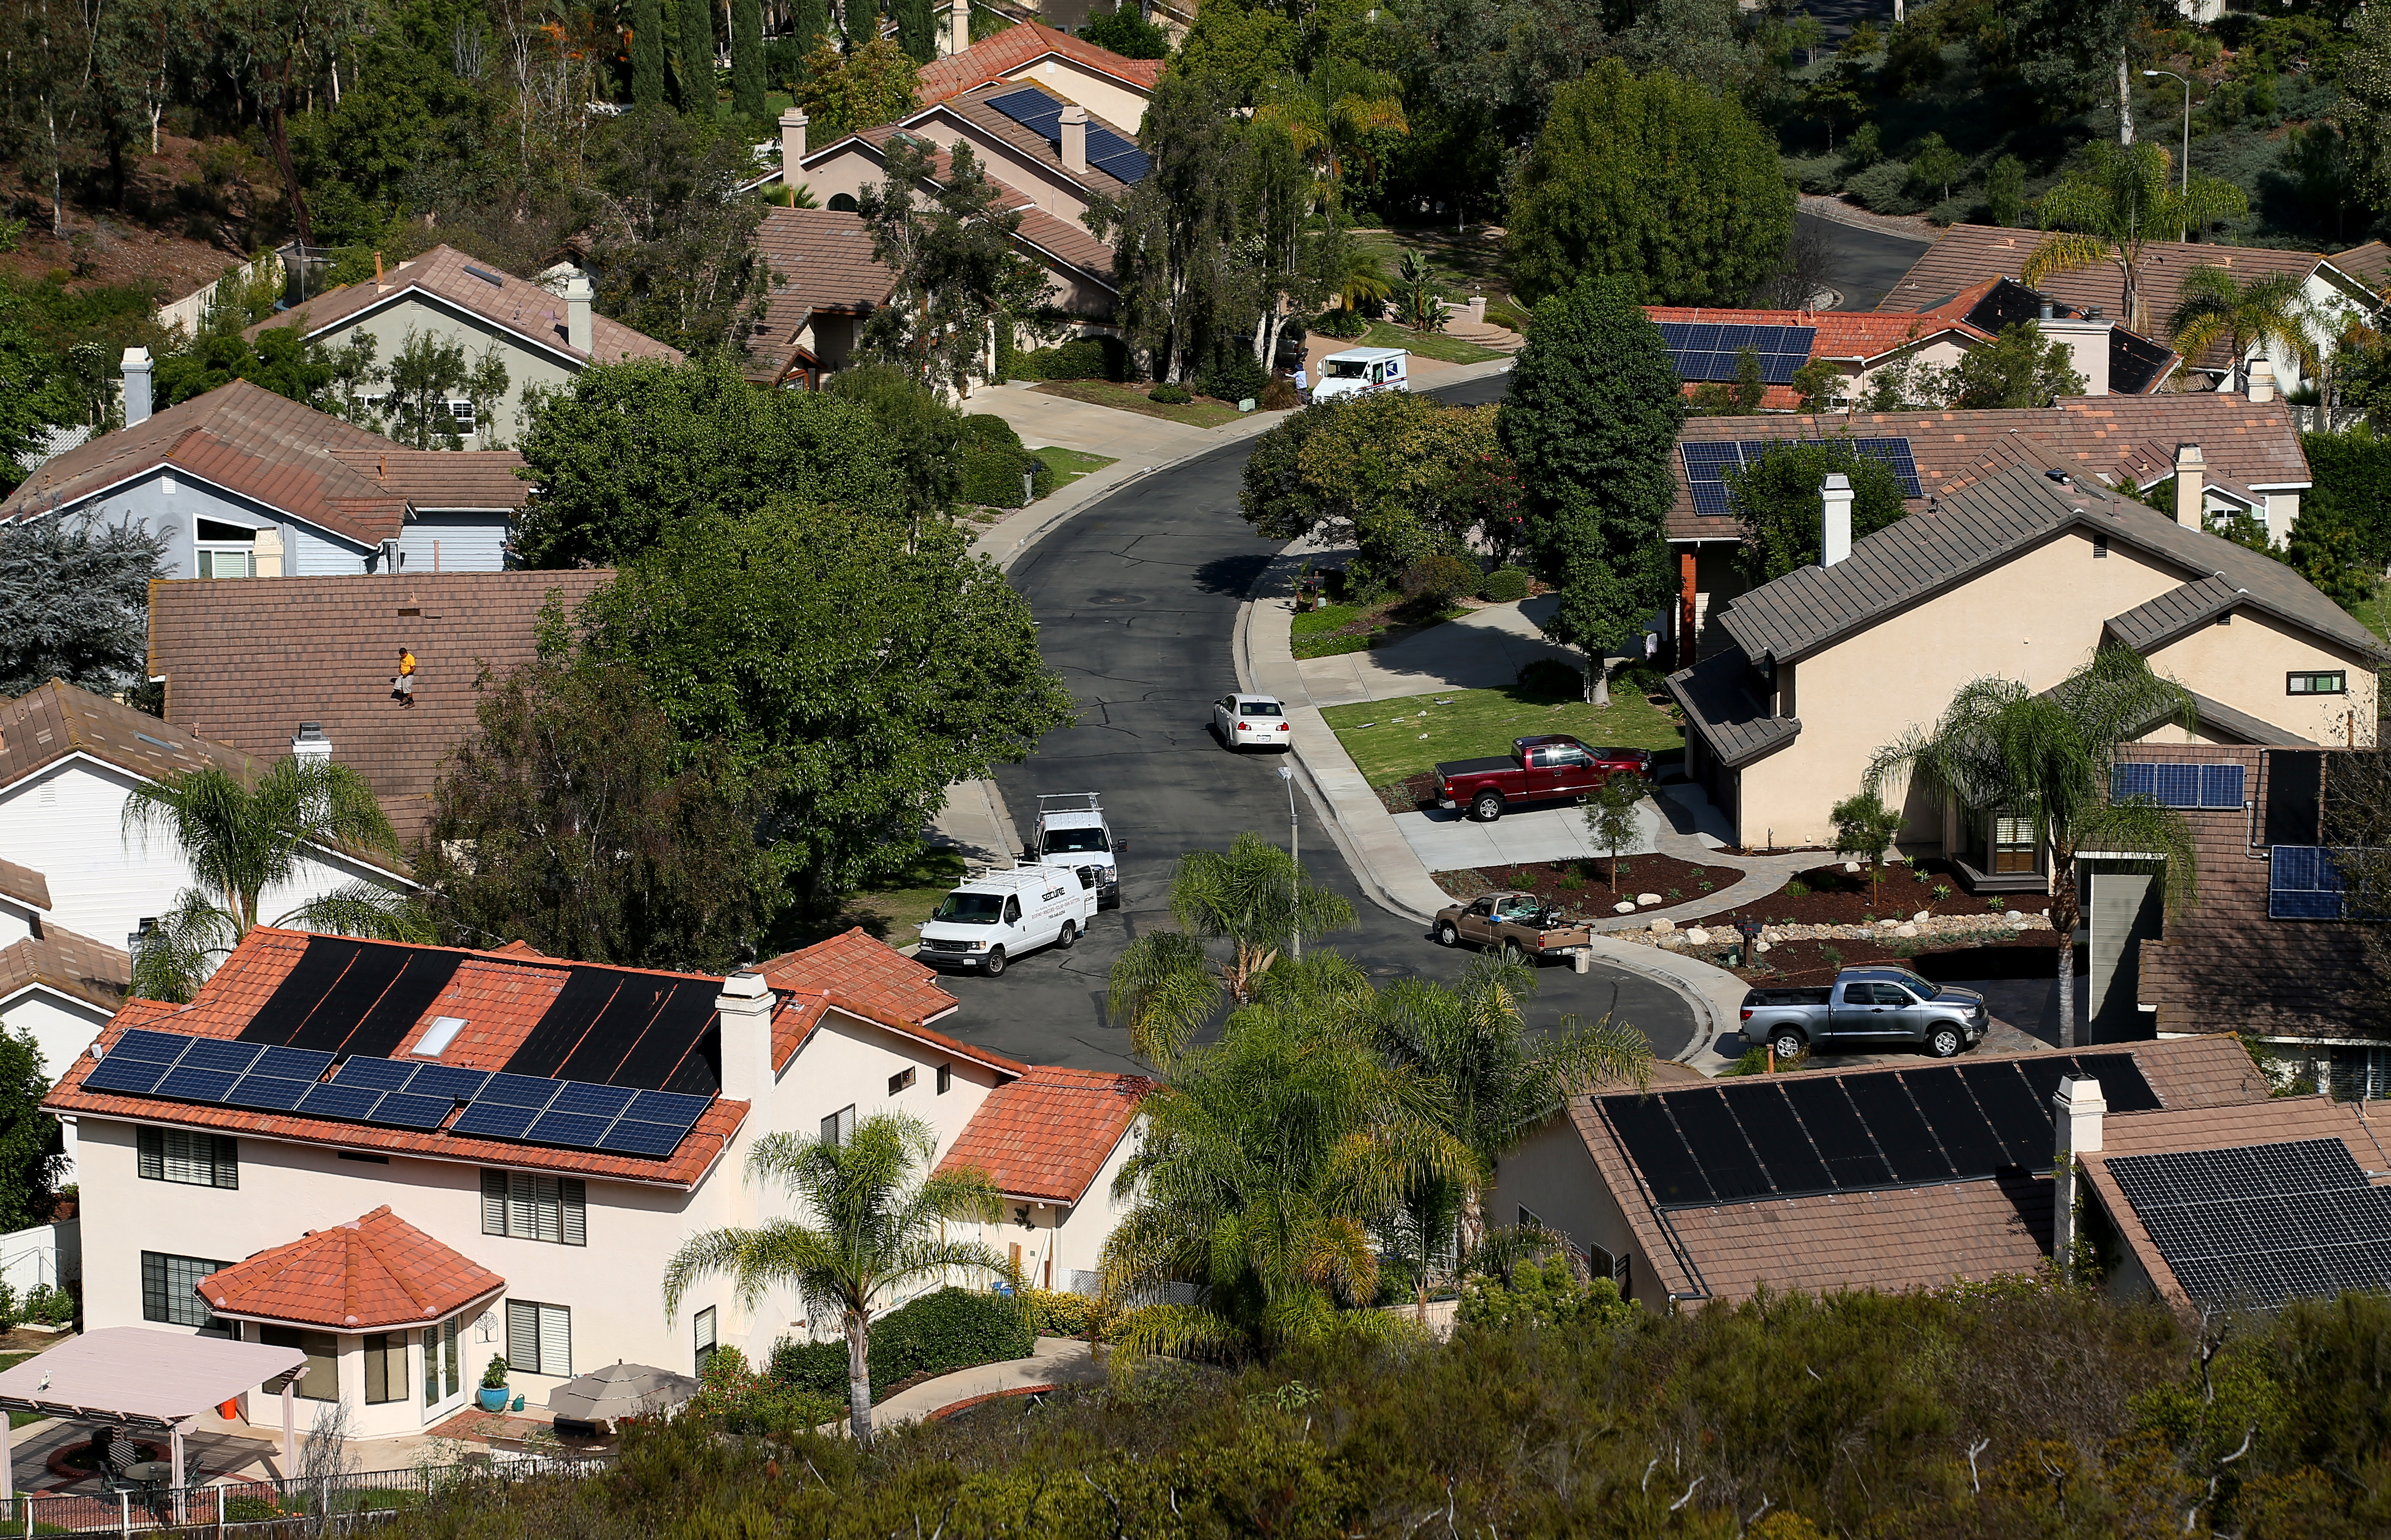 Multiple homes with solar panels are shown in Scripps Ranch, San Diego, California